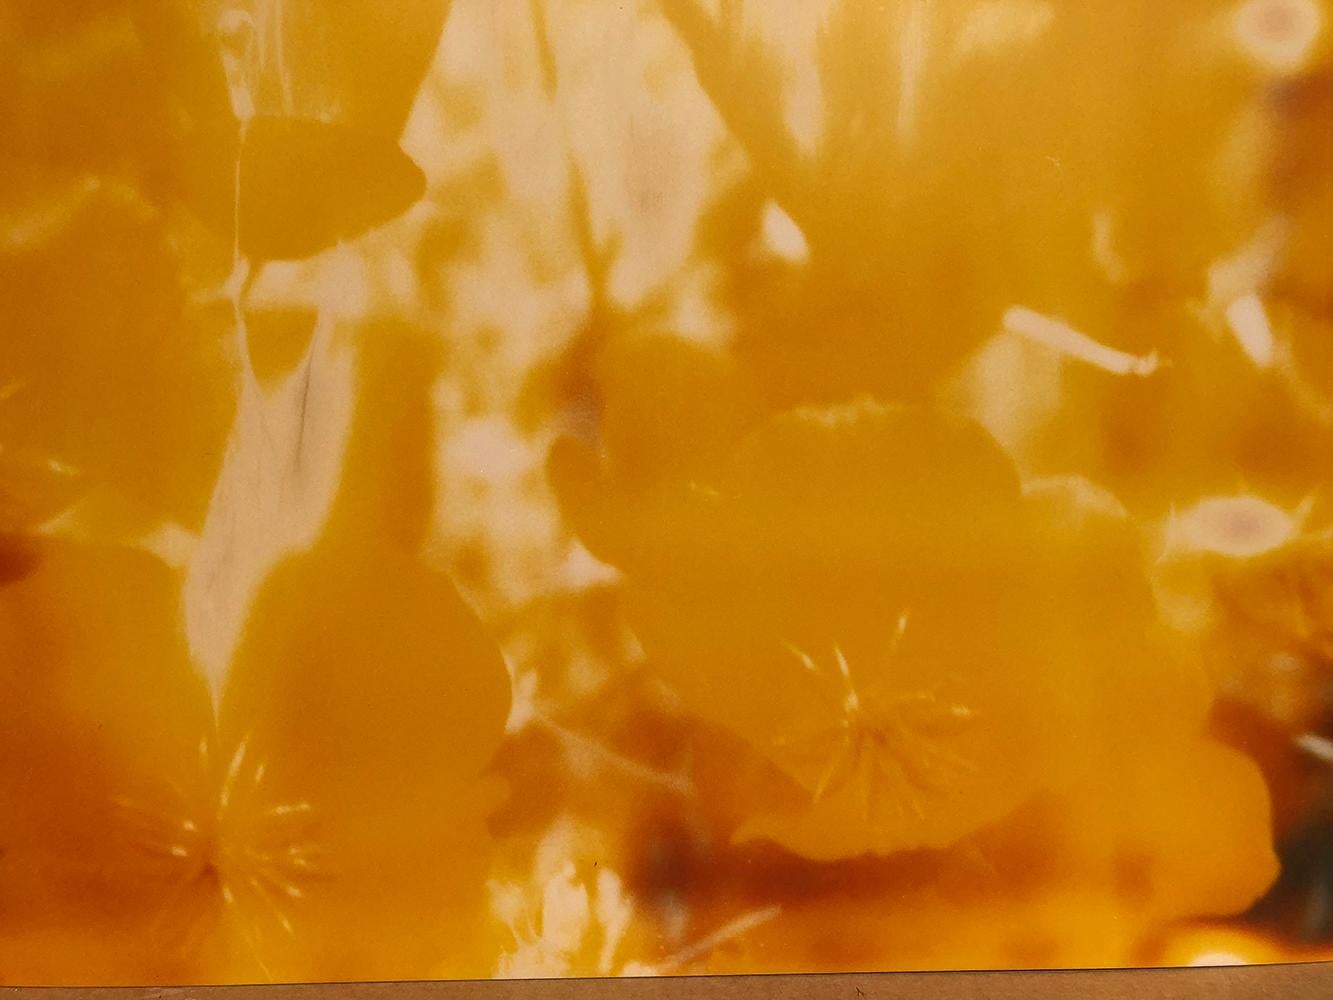 Yellow Flower (The Last Picture Show) 128x125cm, 2005, Edition 4/5, analog C-Print, hand-printed by the artist on Fuji Crystal Archive Paper, based on a Polaroid, sigened on verso, Artist Inventory 672.04, mounted on Aluminum with matte